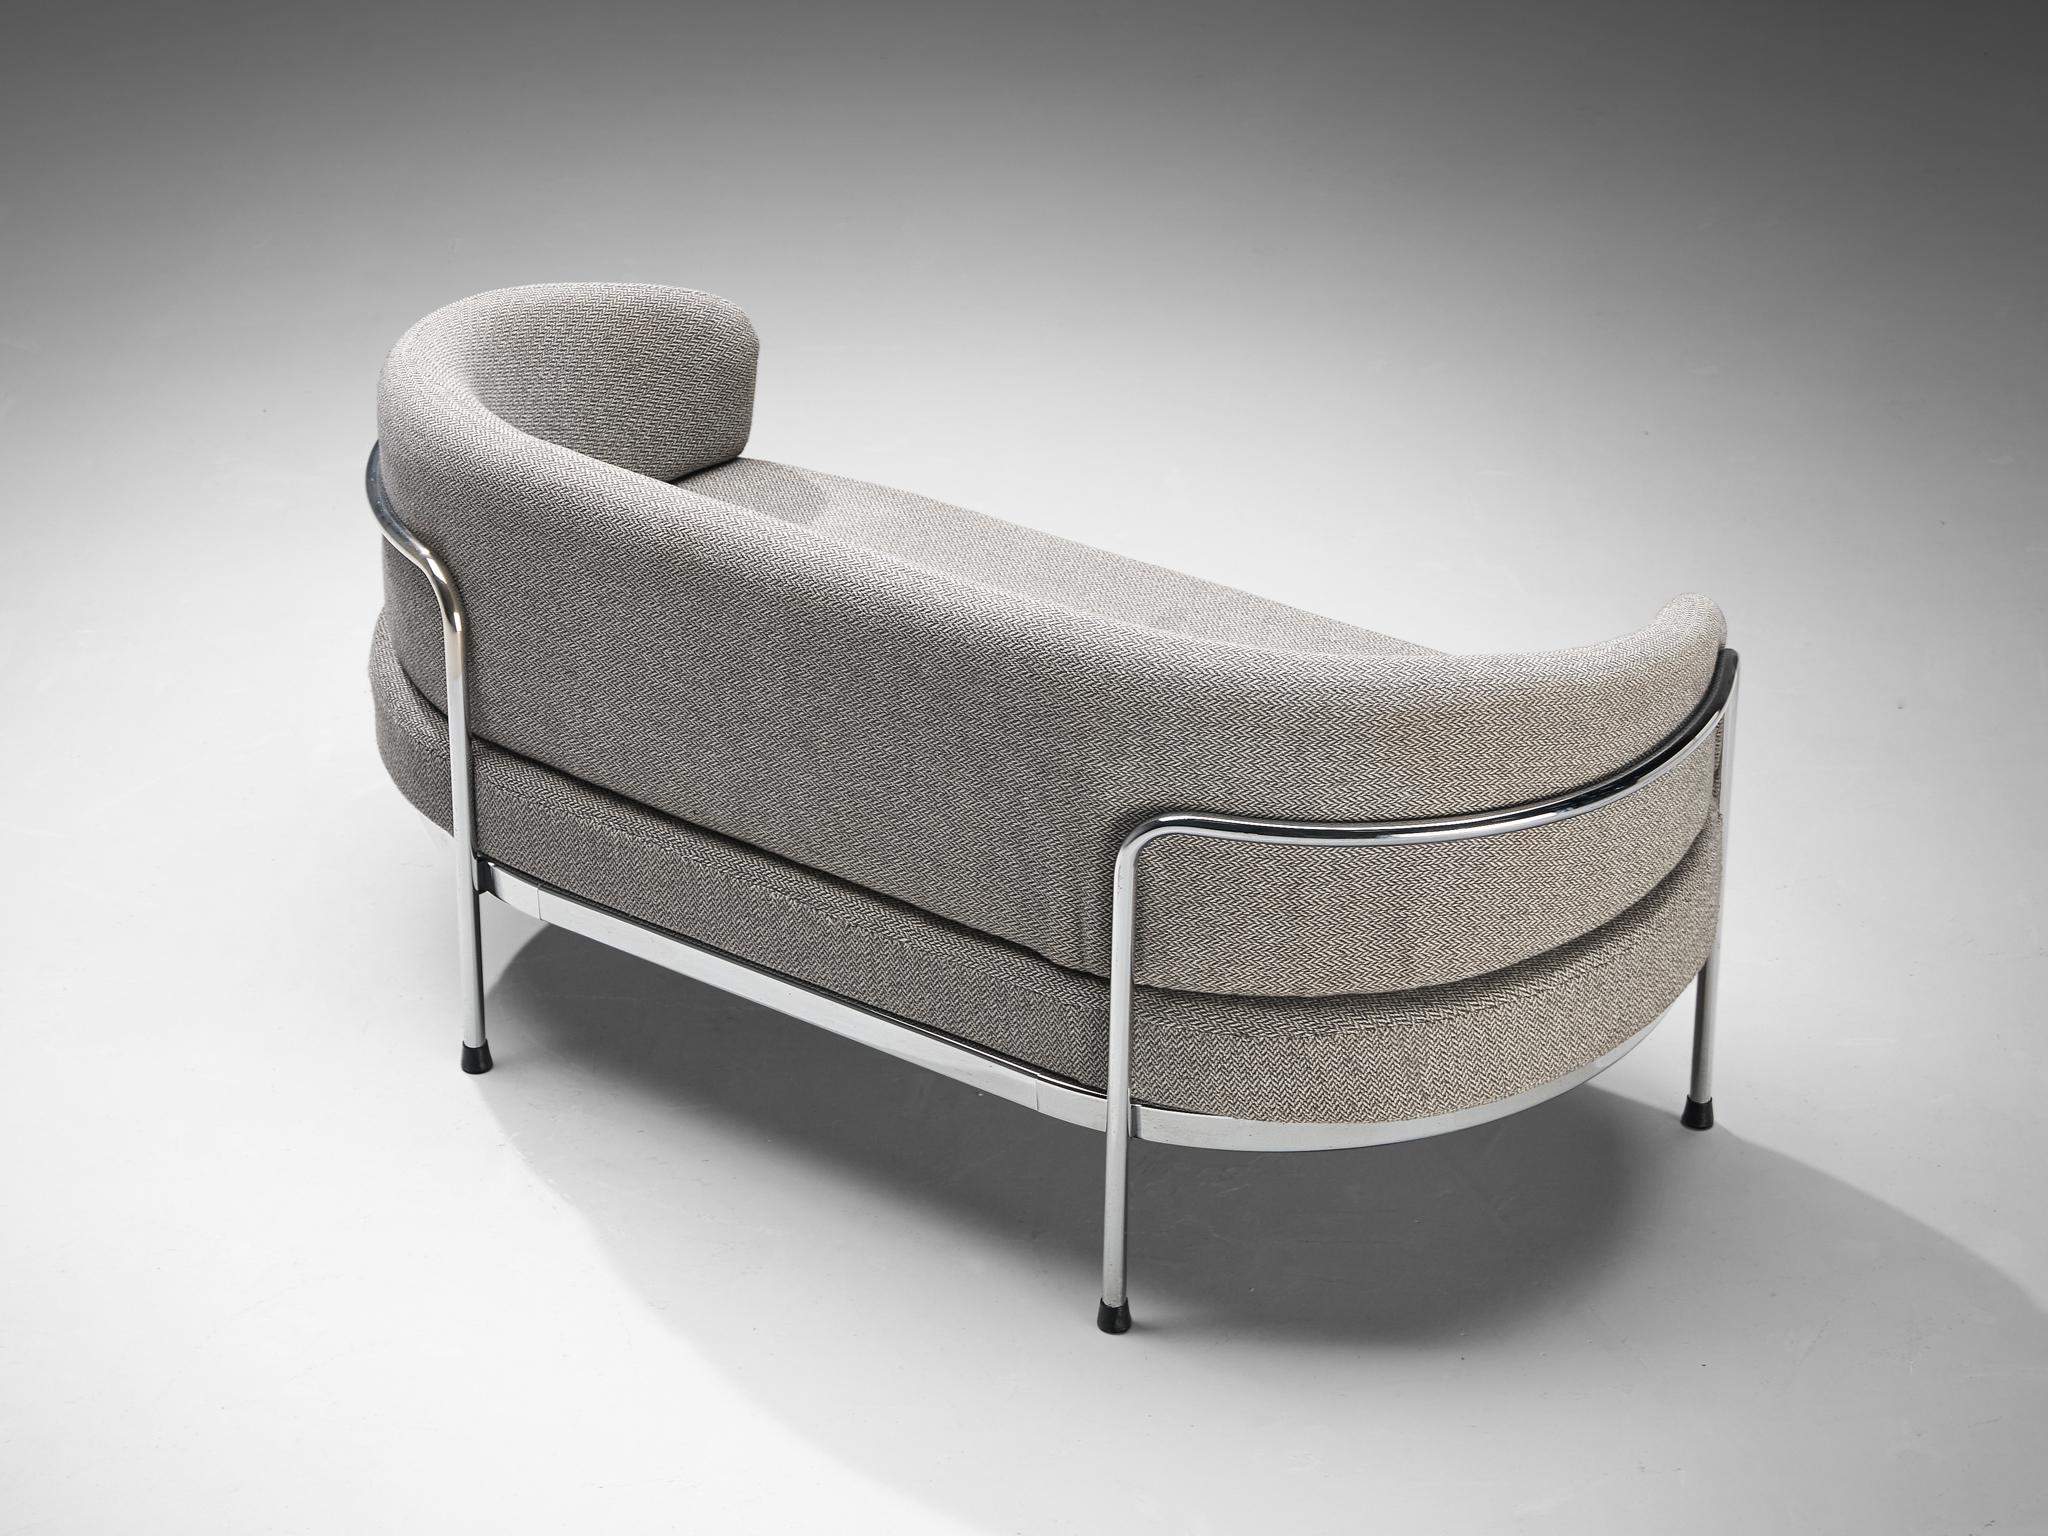 Hans Ell for 't Spectrum, sofa or settee, model 'sz18', chrome-plated metal, fabric, The Netherlands, 1970-71 

This sofa is designed by Hans Ell for 't Spectrum. A rare model, as this sofa has only been in production for one year, hence the rarity